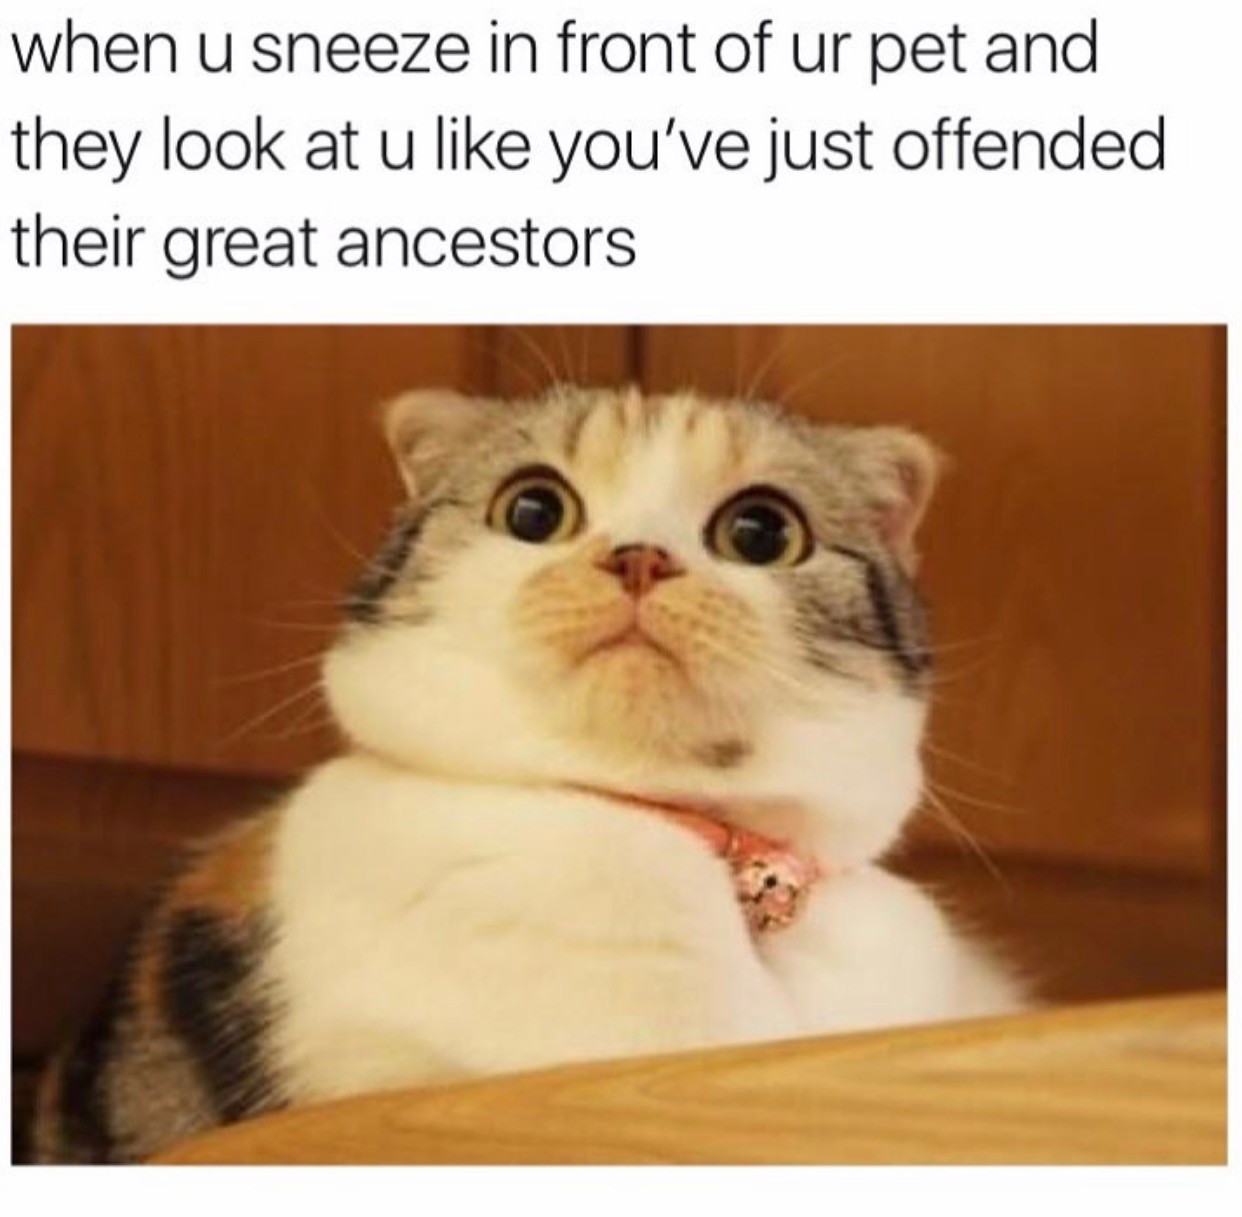 funny cat memes - when u sneeze in front of ur pet and they look at u you've just offended their great ancestors